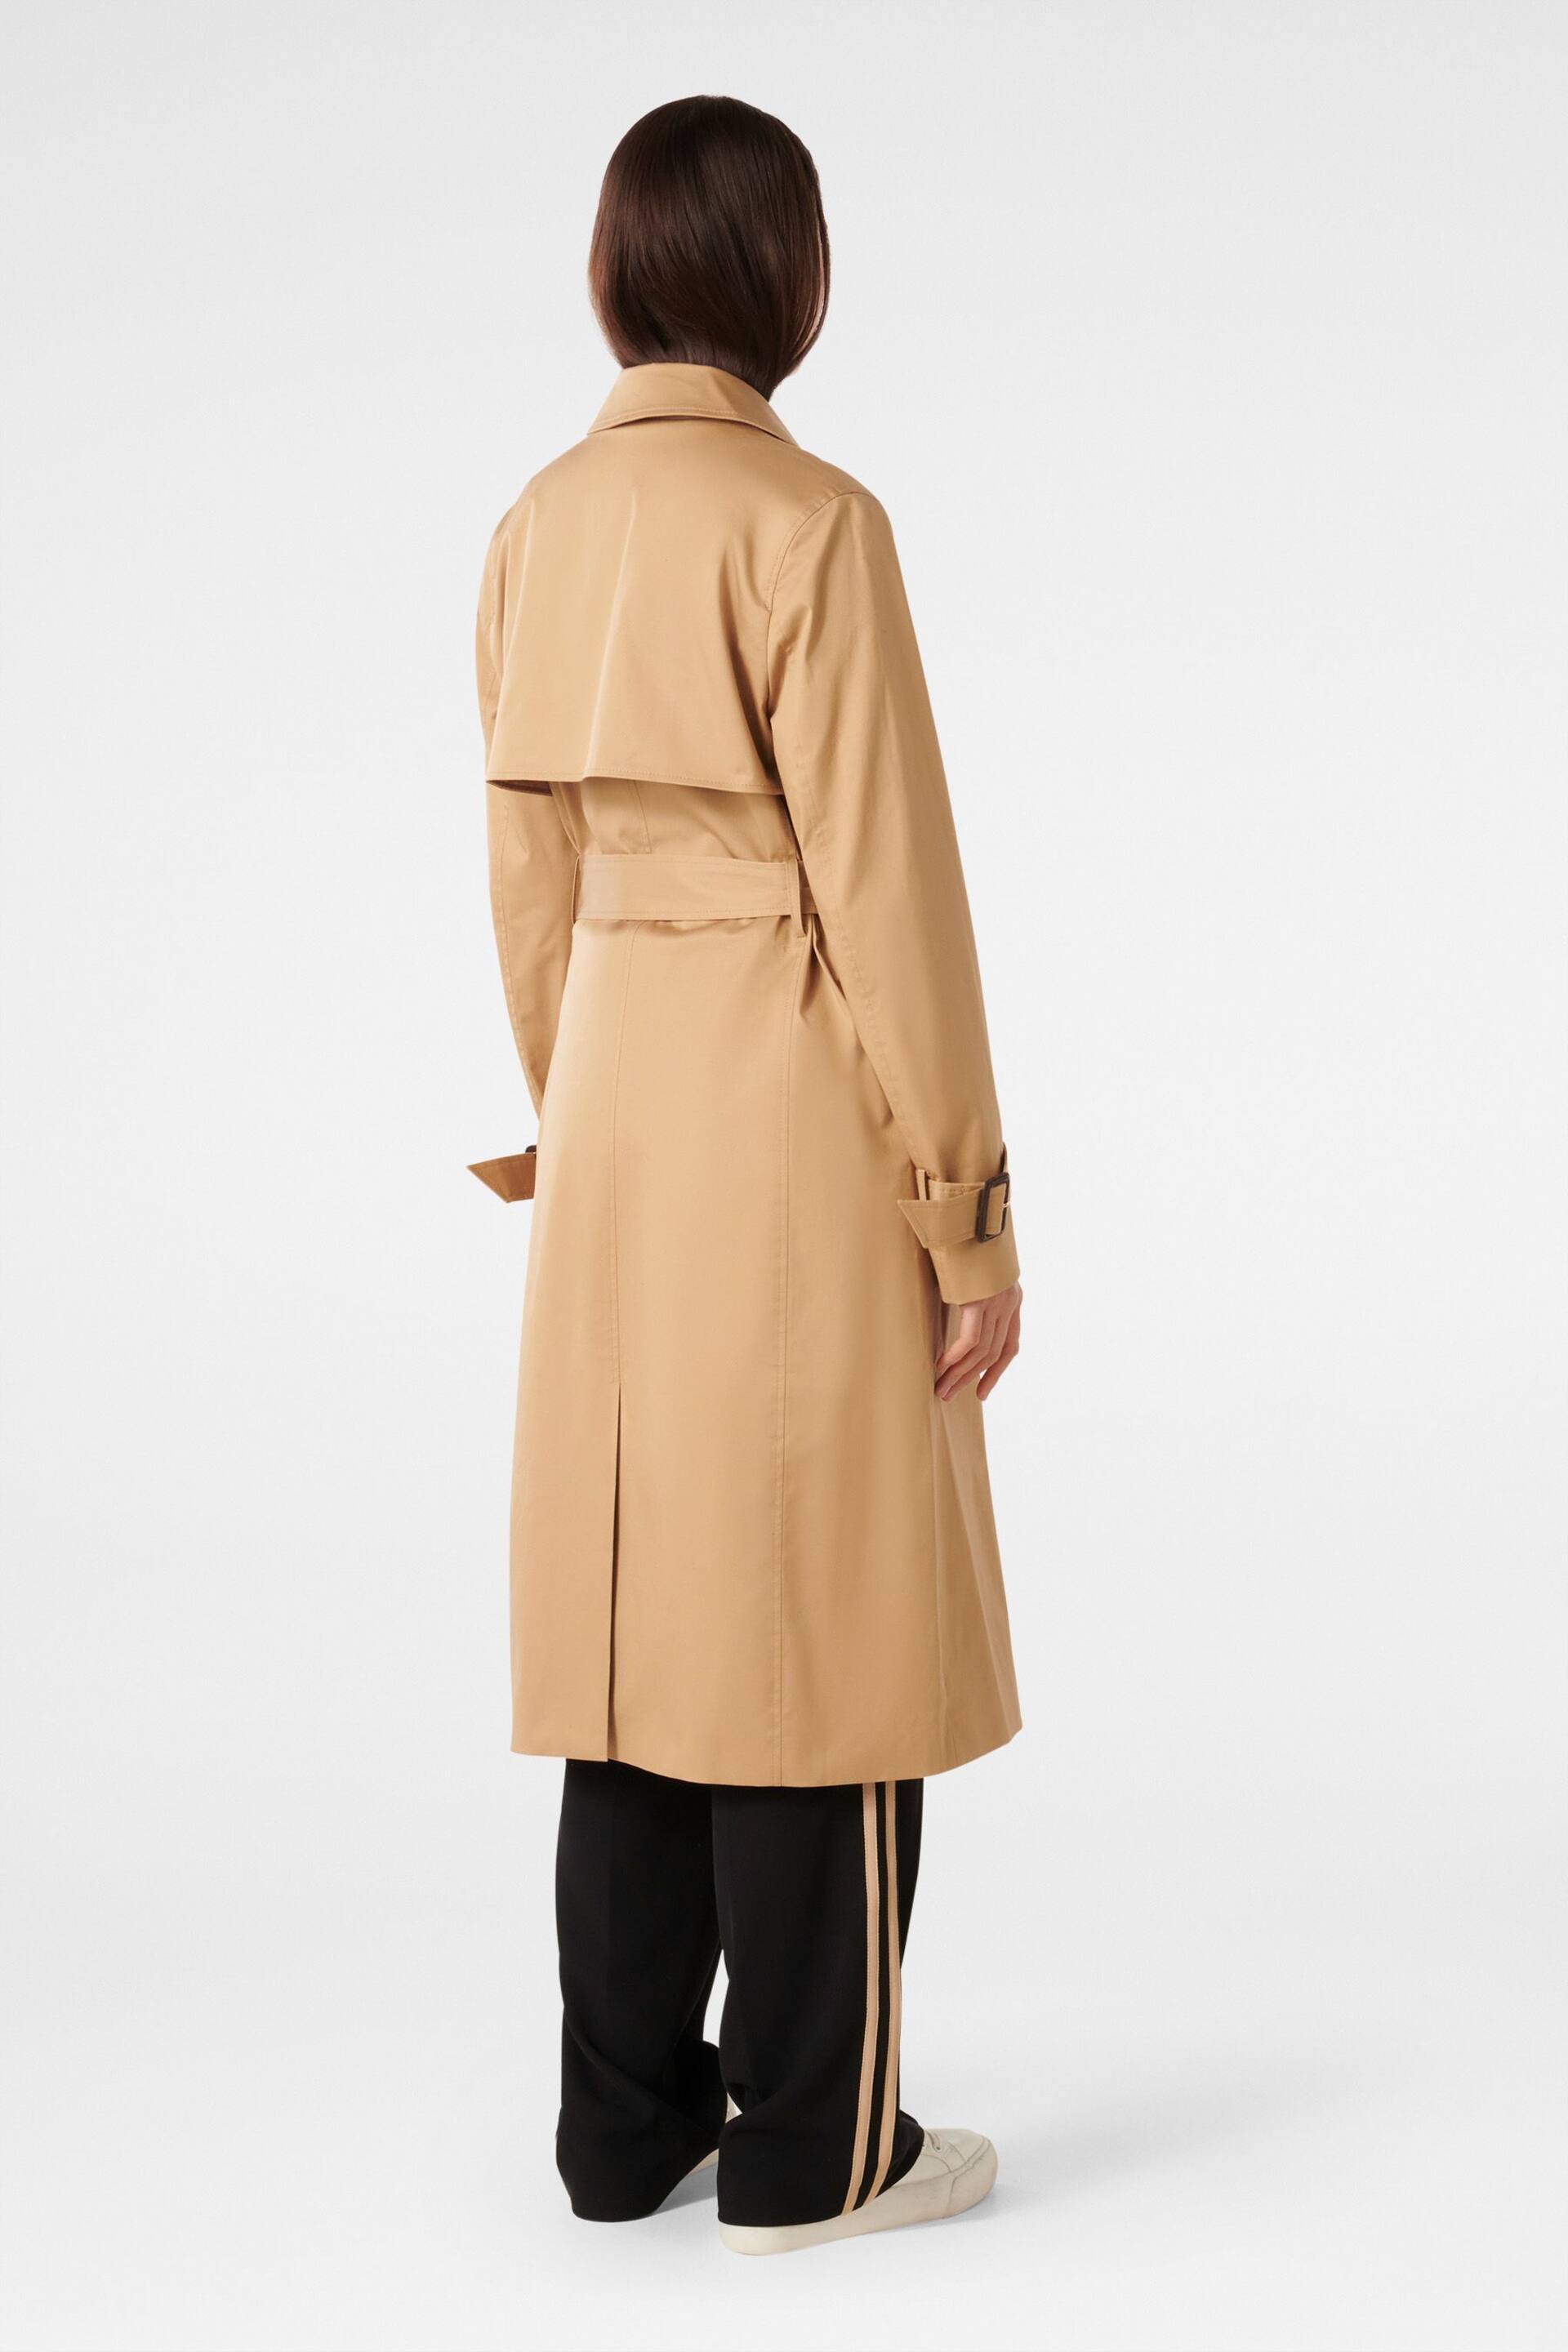 Forever New Animal Jacinta Classic Trench Coat - Image 2 of 4